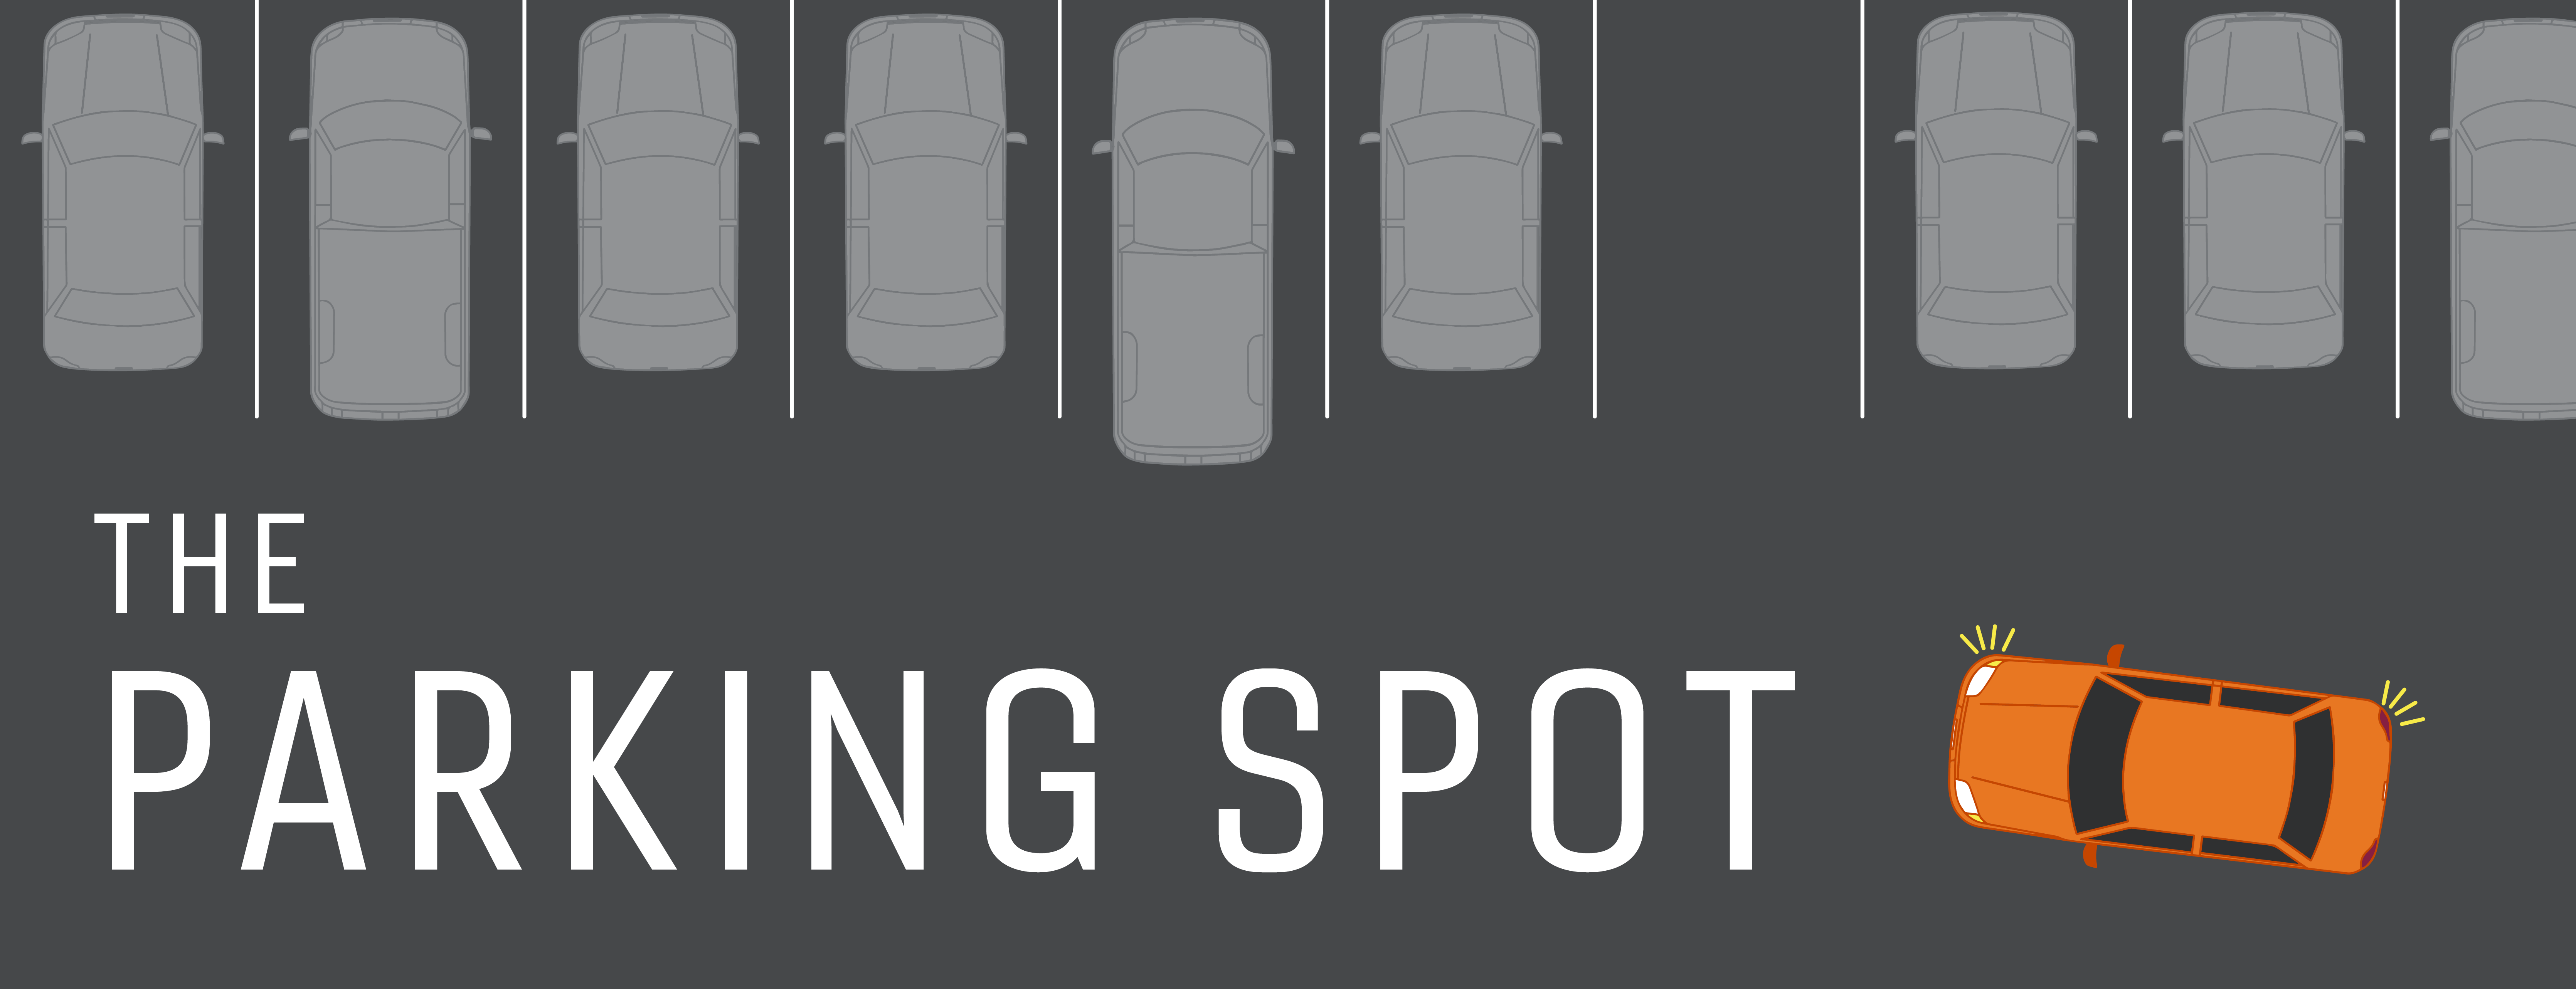 The Parking Spot logo illustration with an orange car pulling into an empty space